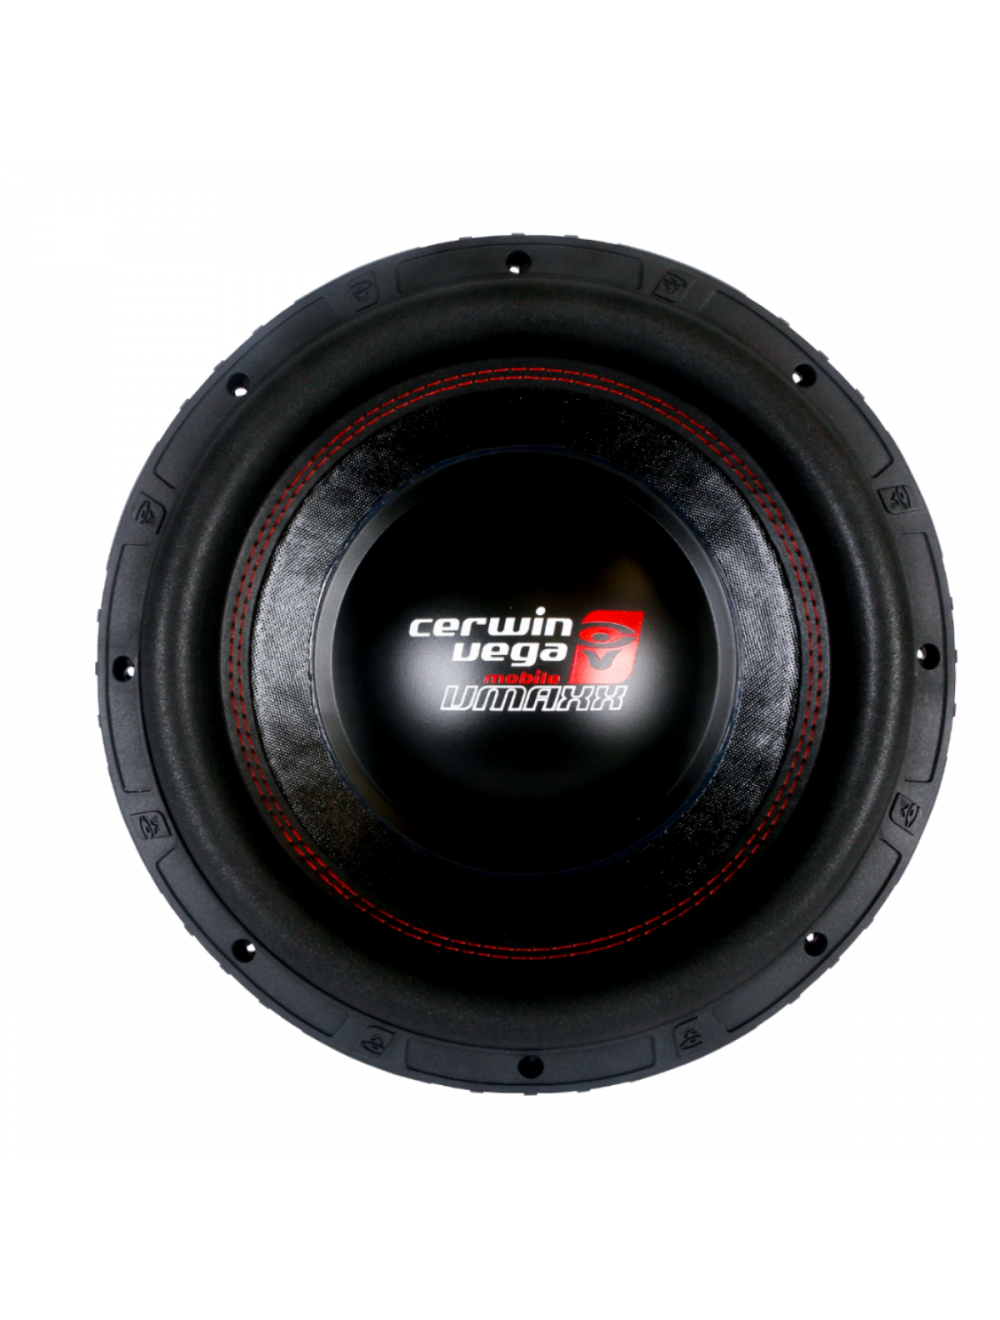 Cerwin Vega VMAX15D4 15" 3000W (1500W RMS) Dual 4 ohm High-Performance Subwoofer